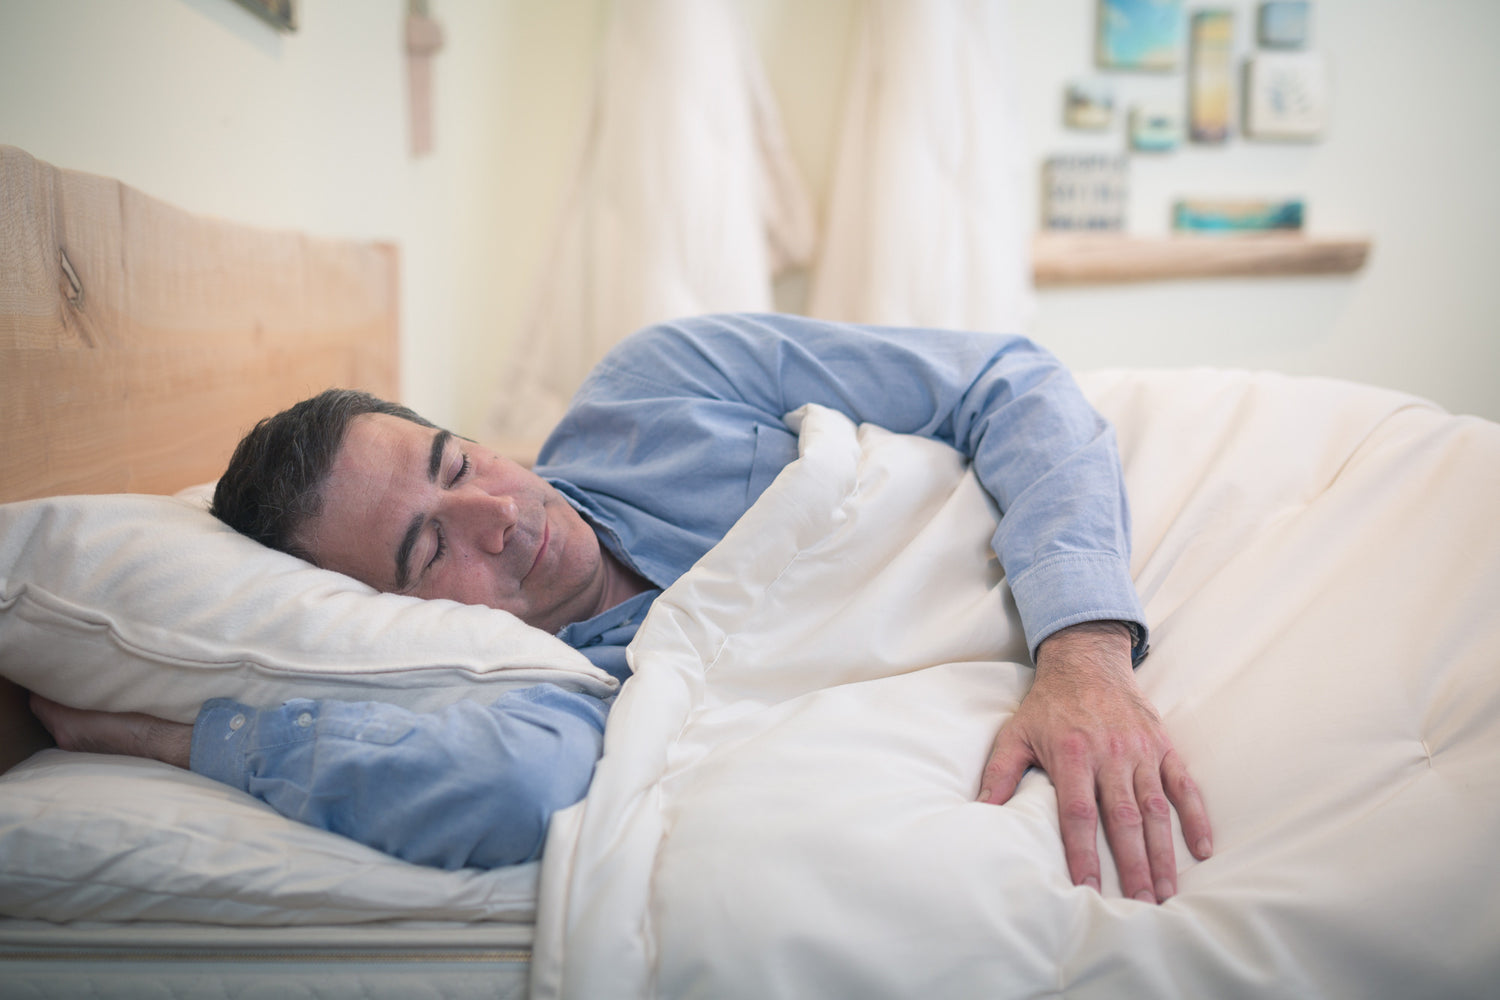 Temperature Regulation for a Better Sleep - 7 Tips to Regulate Temperature